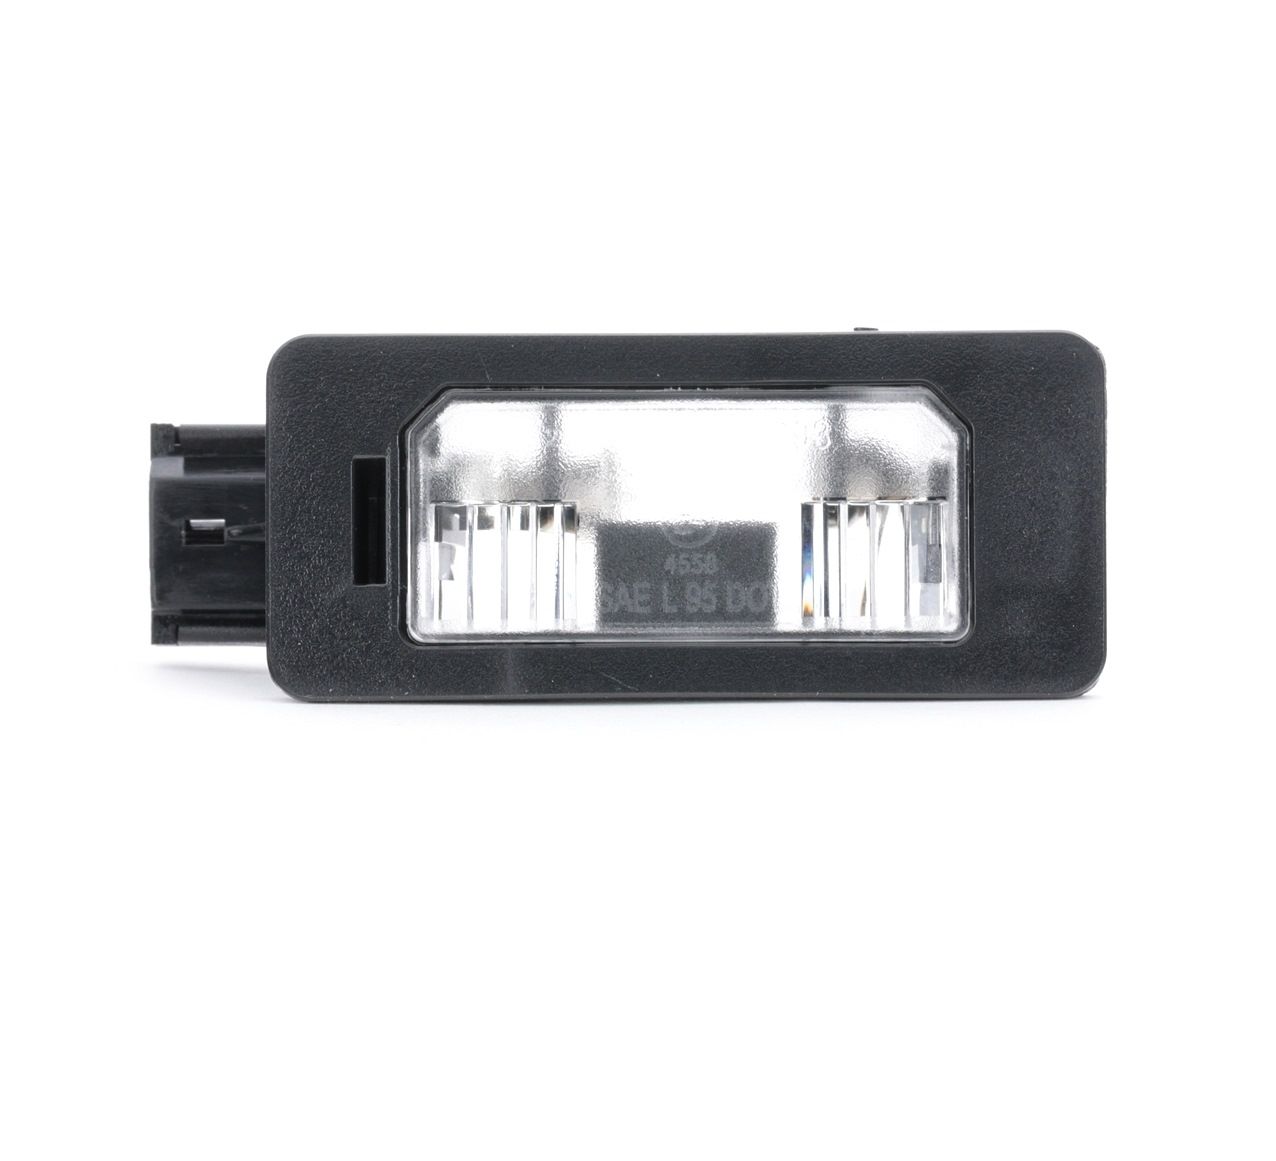 BMW Licence Plate Light TYC 15-0293-00-9 at a good price